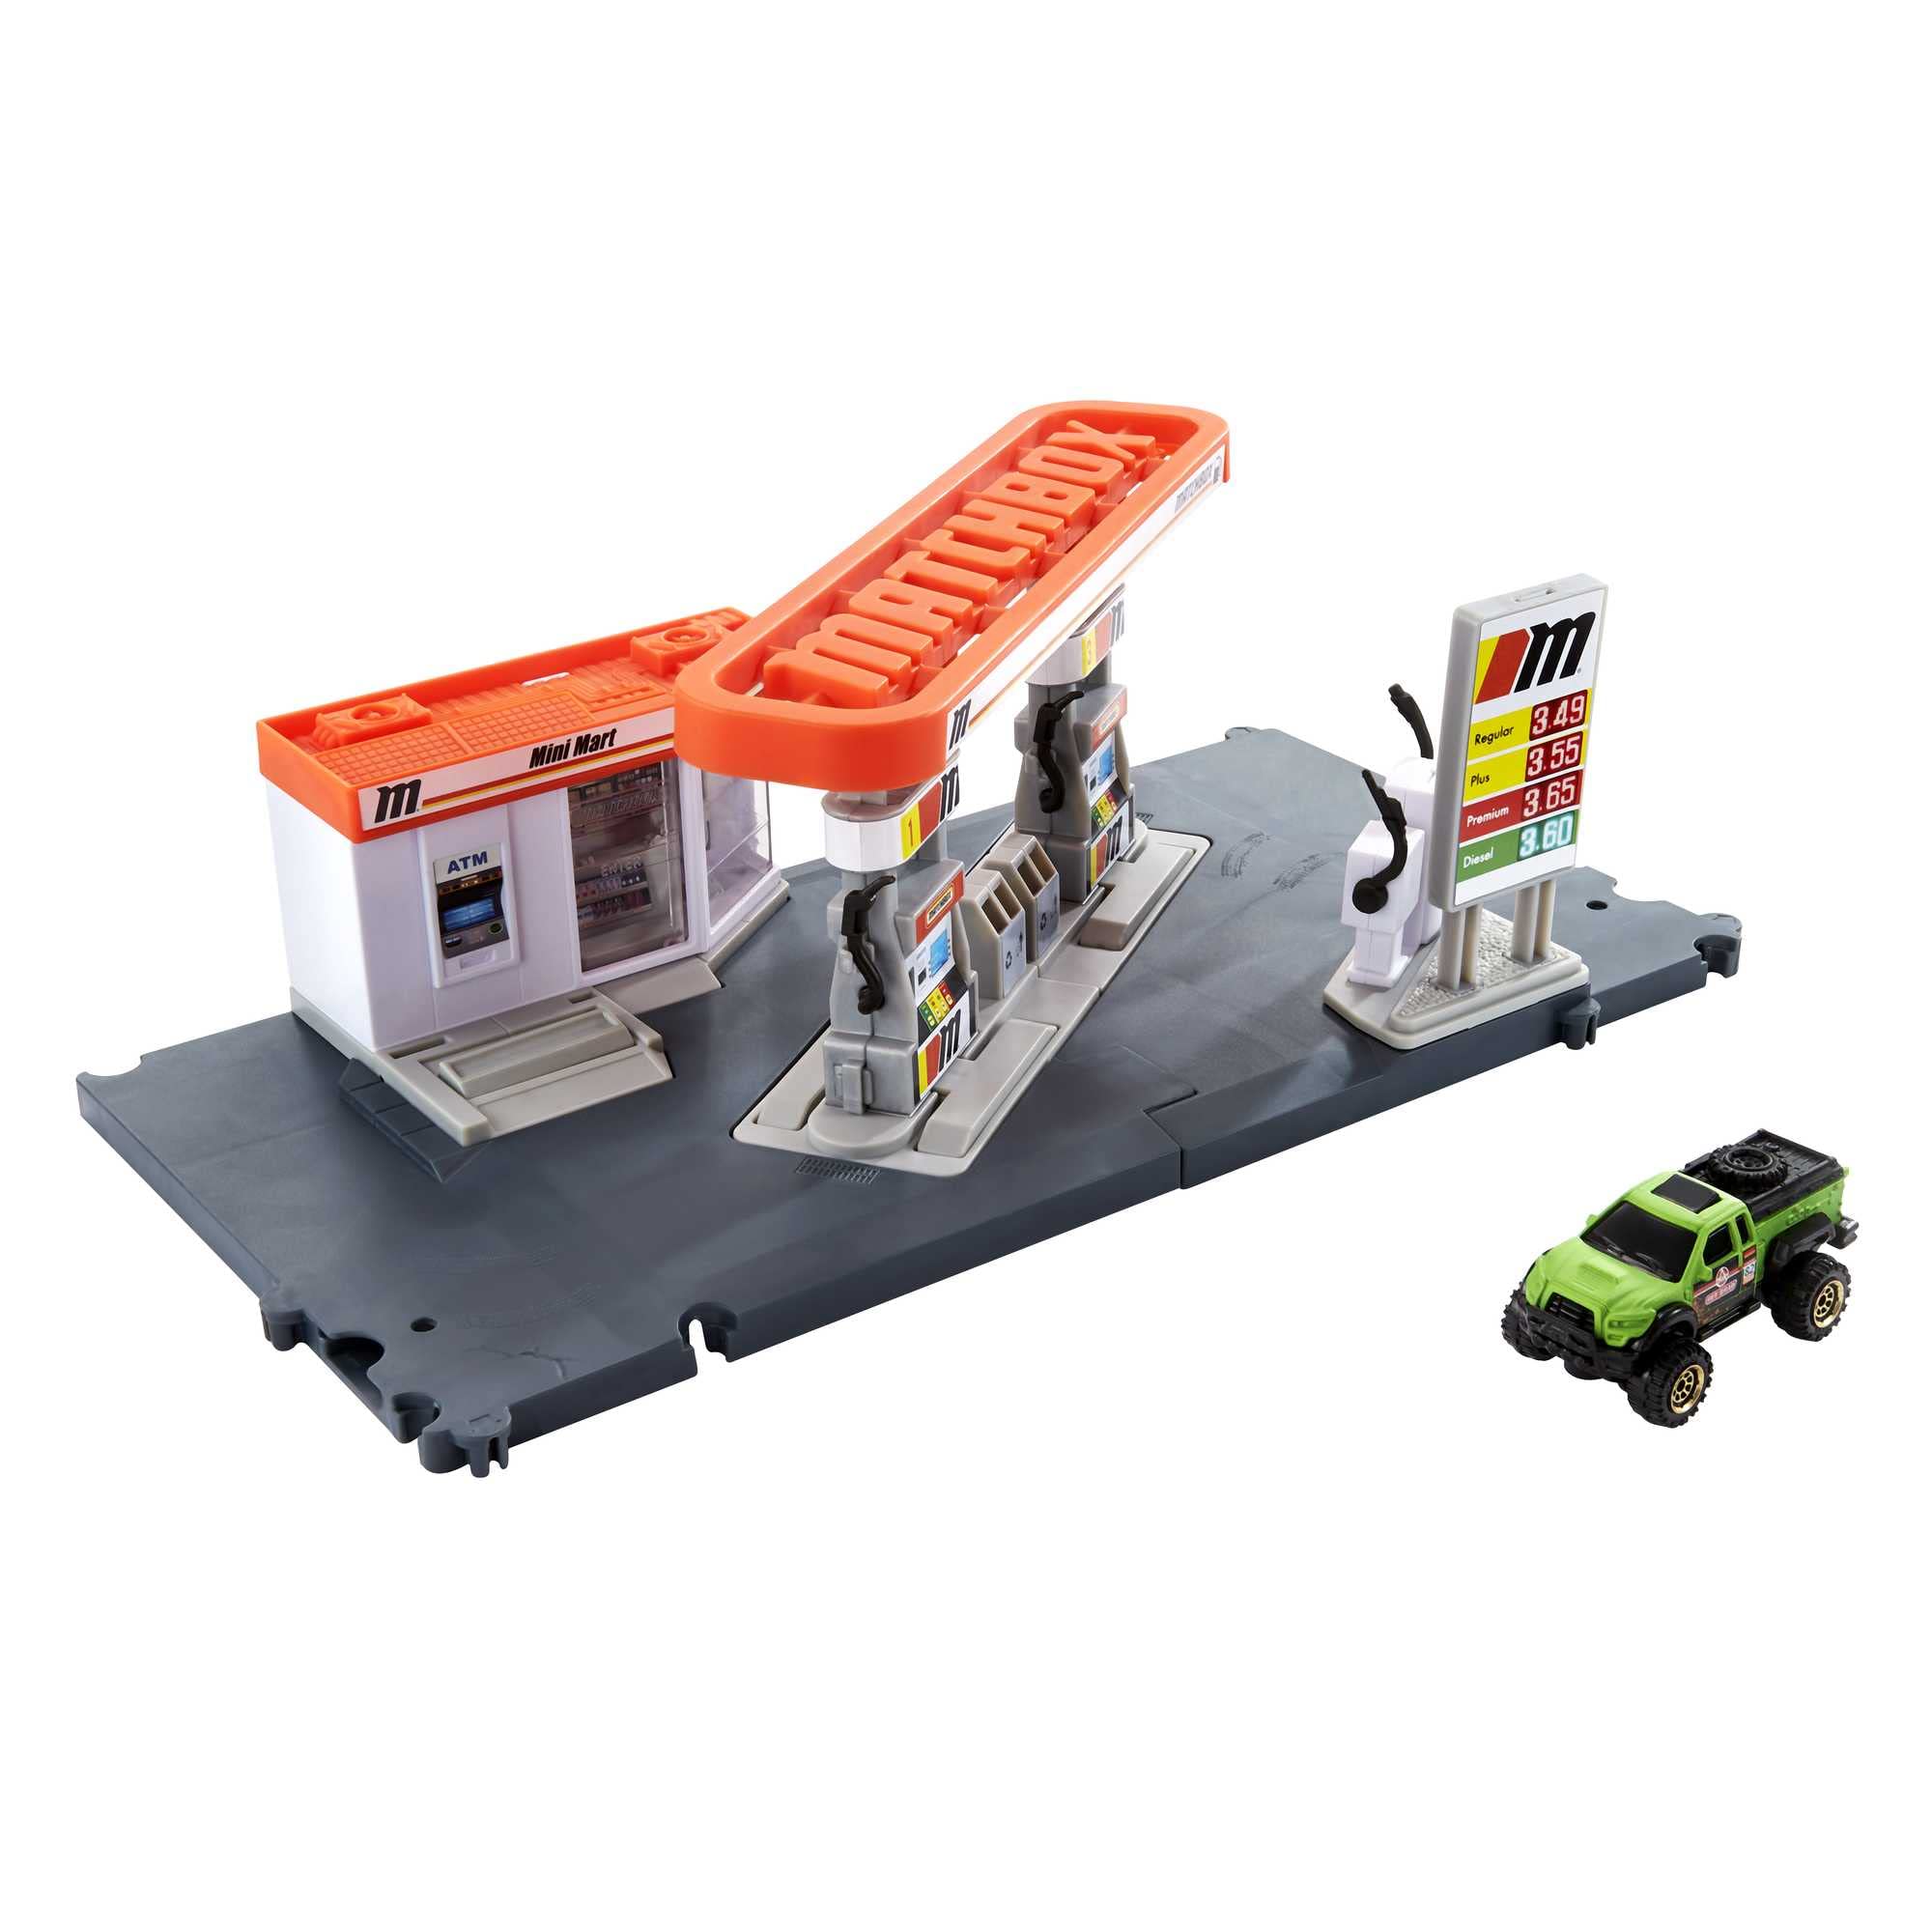 Matchbox Cars Action Drivers Playset w/ Fuel Station, Toy Truck & Moveable Gas Hoses $10 + Free Shipping w/ Walmart+ or on $35+